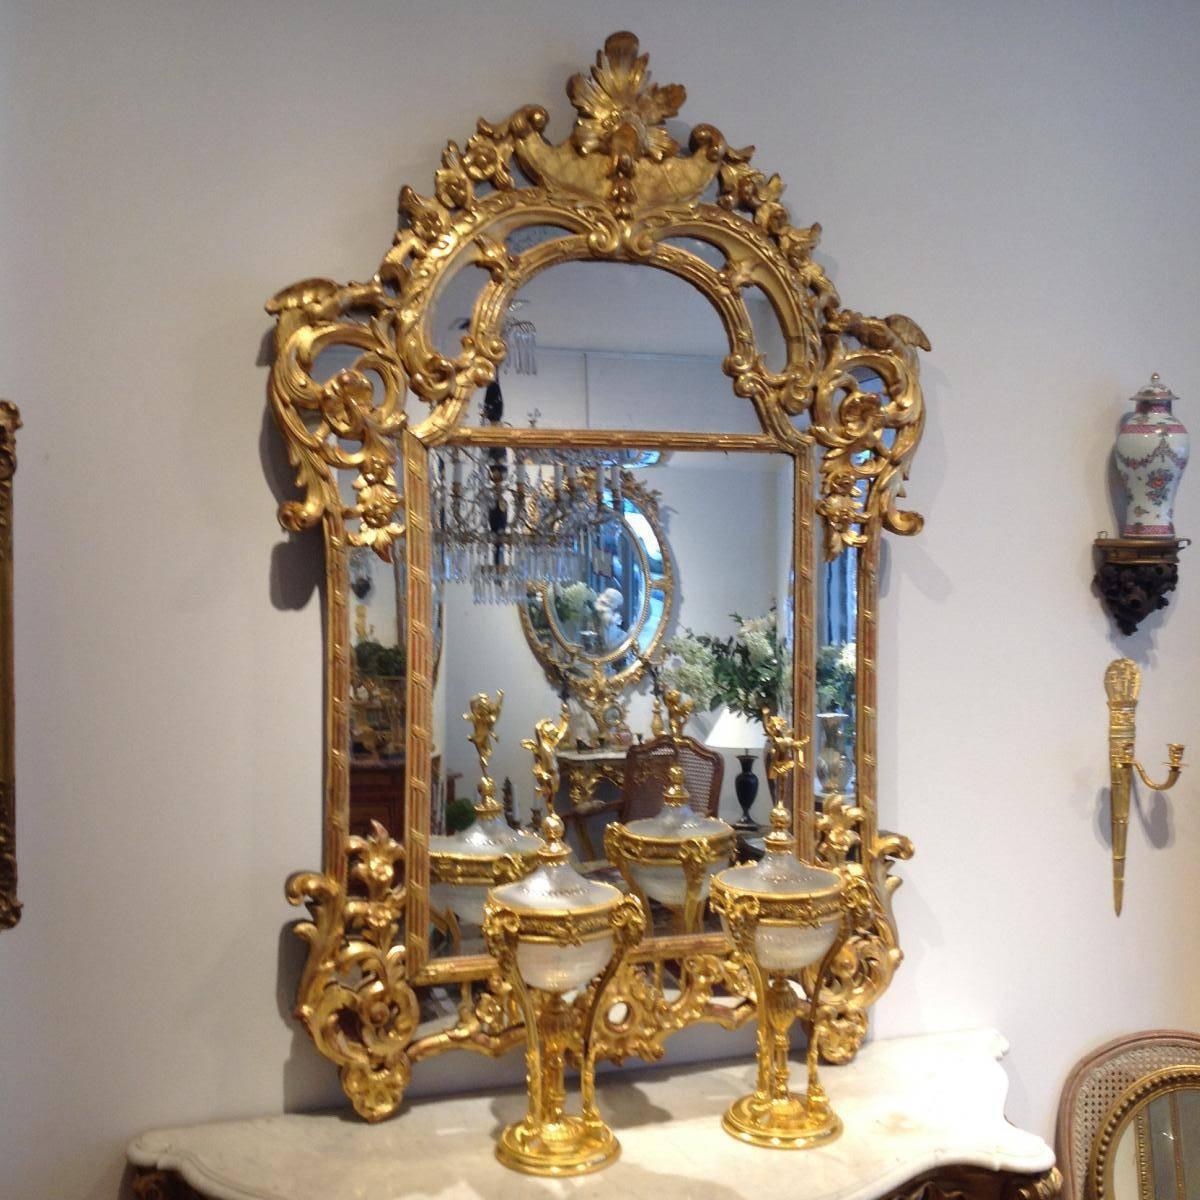 Mirror in gilded wood and mercury glass, Regency period. Decors with acanthus leaves, flowers, and shells.
Very decorative and elegant piece.
 